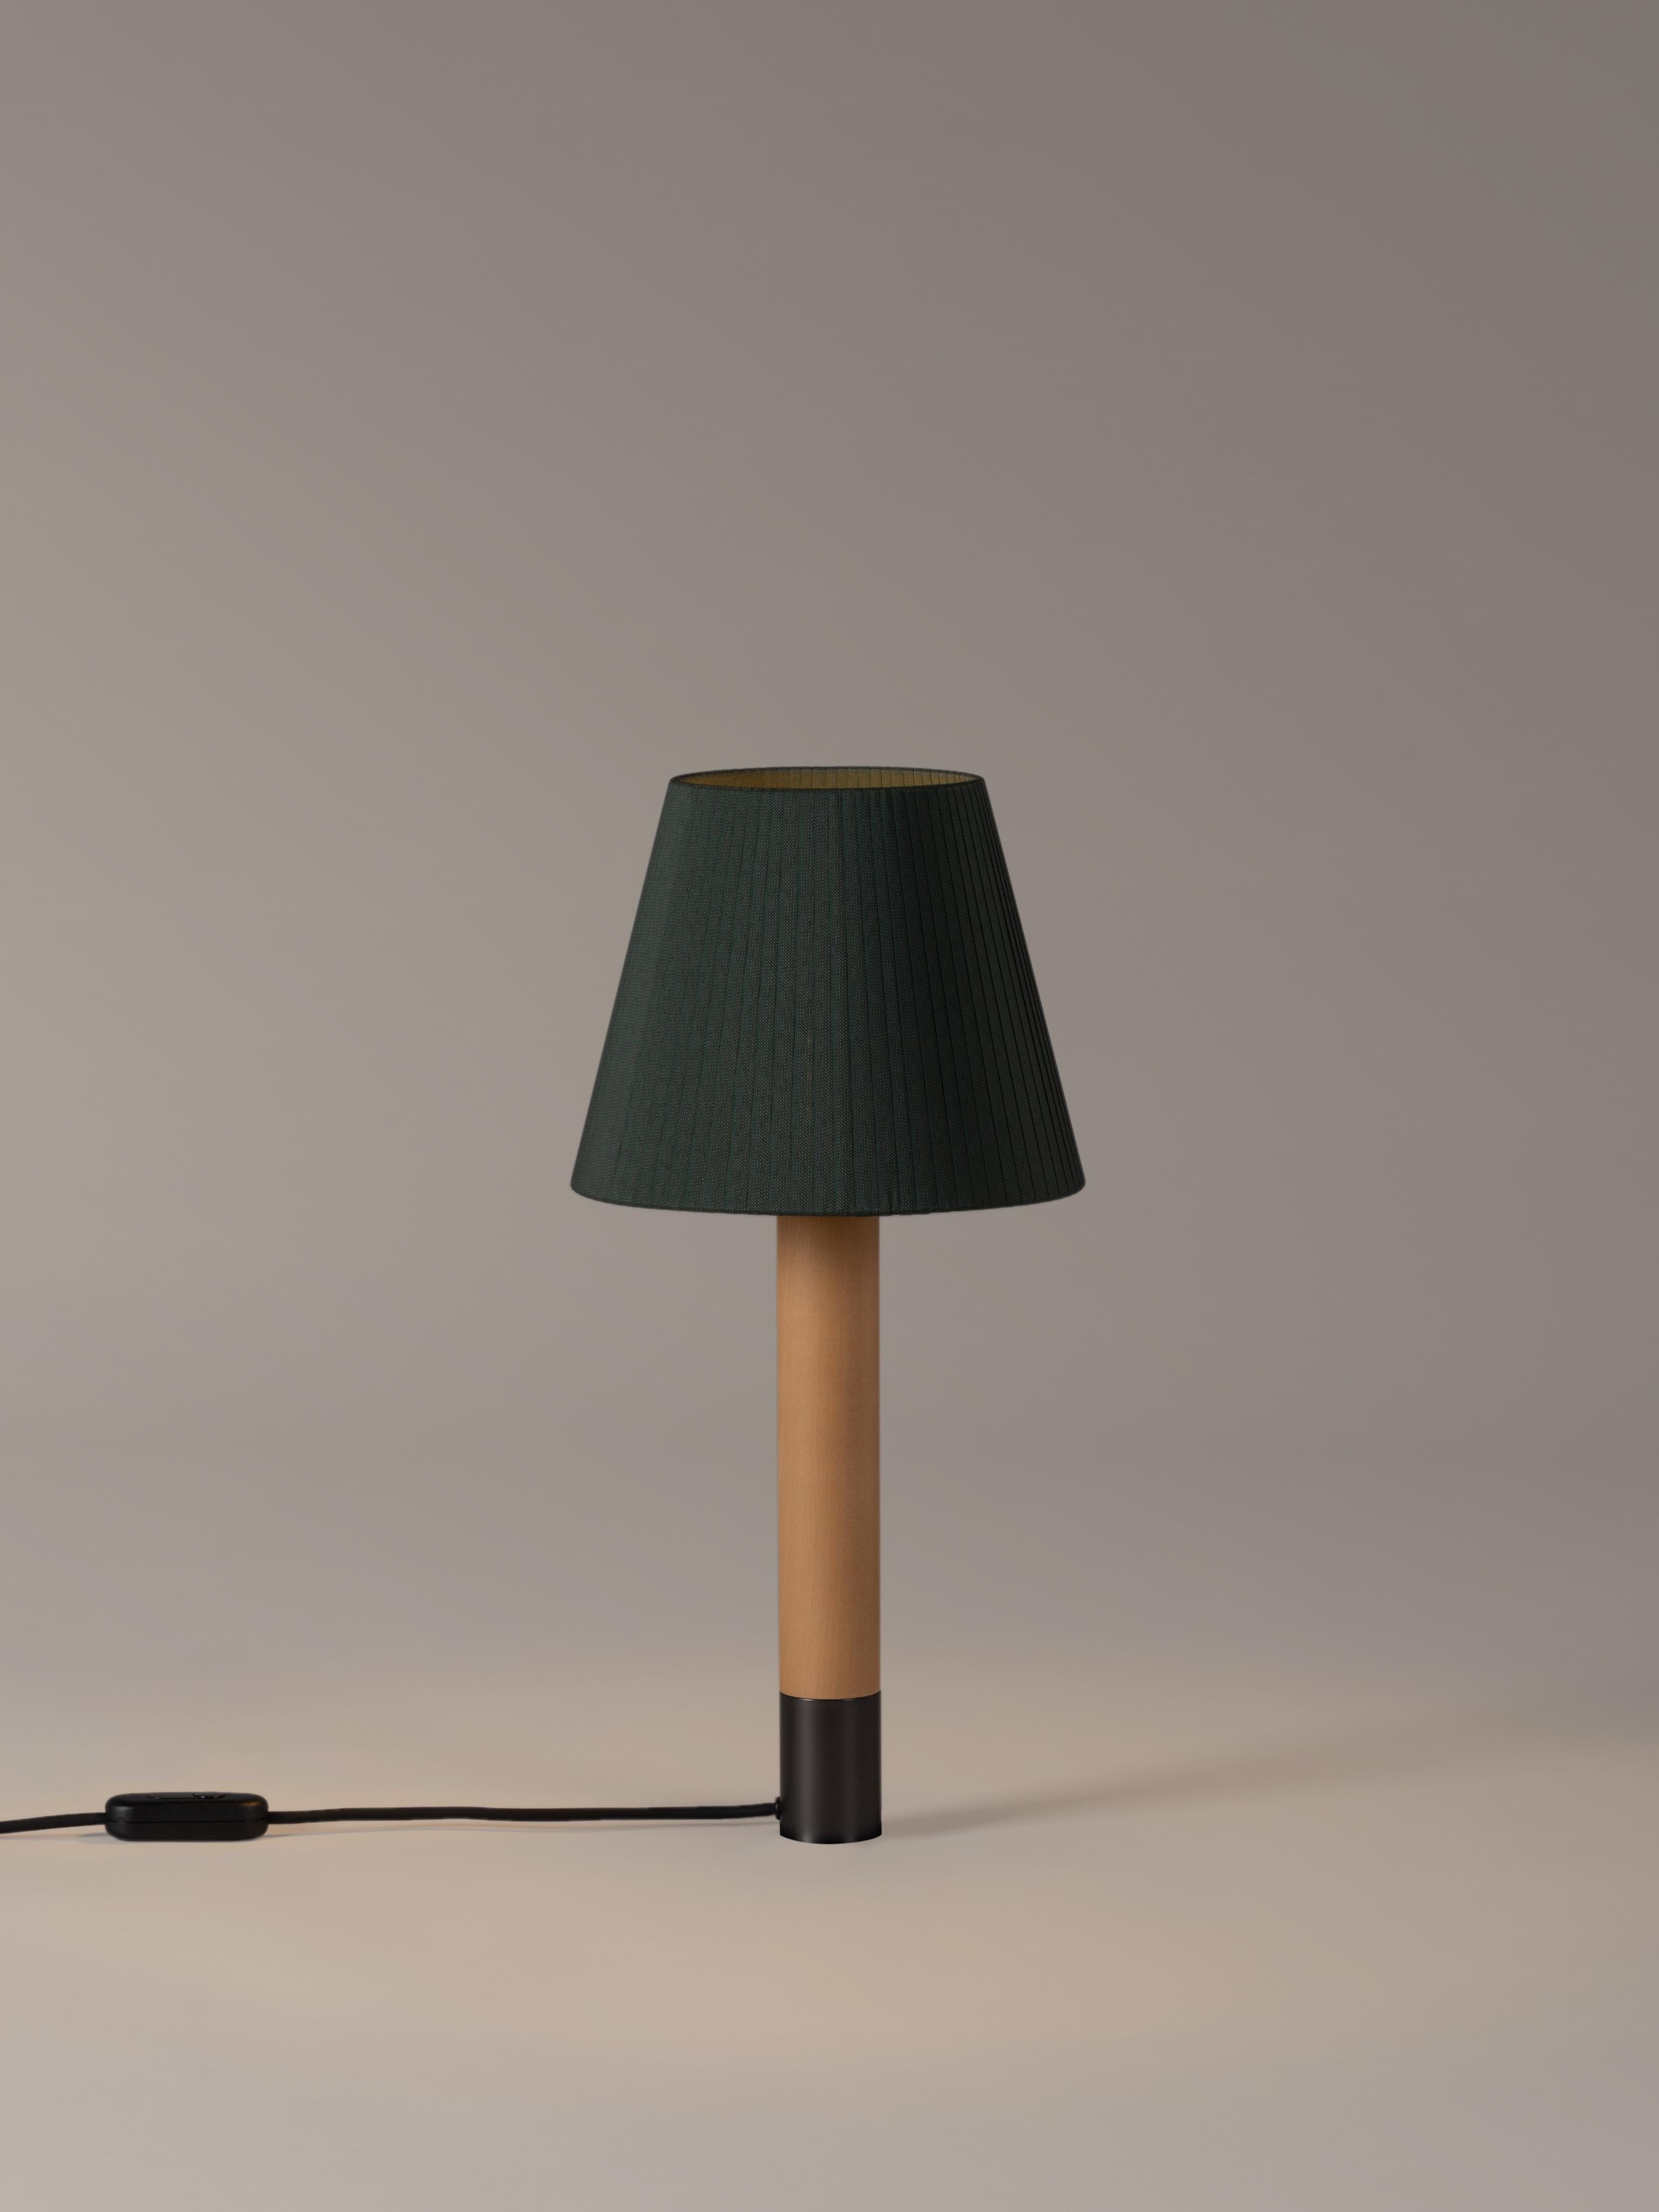 Bronze and Green Básica M1 table lamp by Santiago Roqueta, Santa & Cole.
Dimensions: D 25 x H 52 cm.
Materials: Bronze, birch wood, ribbon.
Available in other shade colors and with or without the stabilizing disc.
Available in nickel or